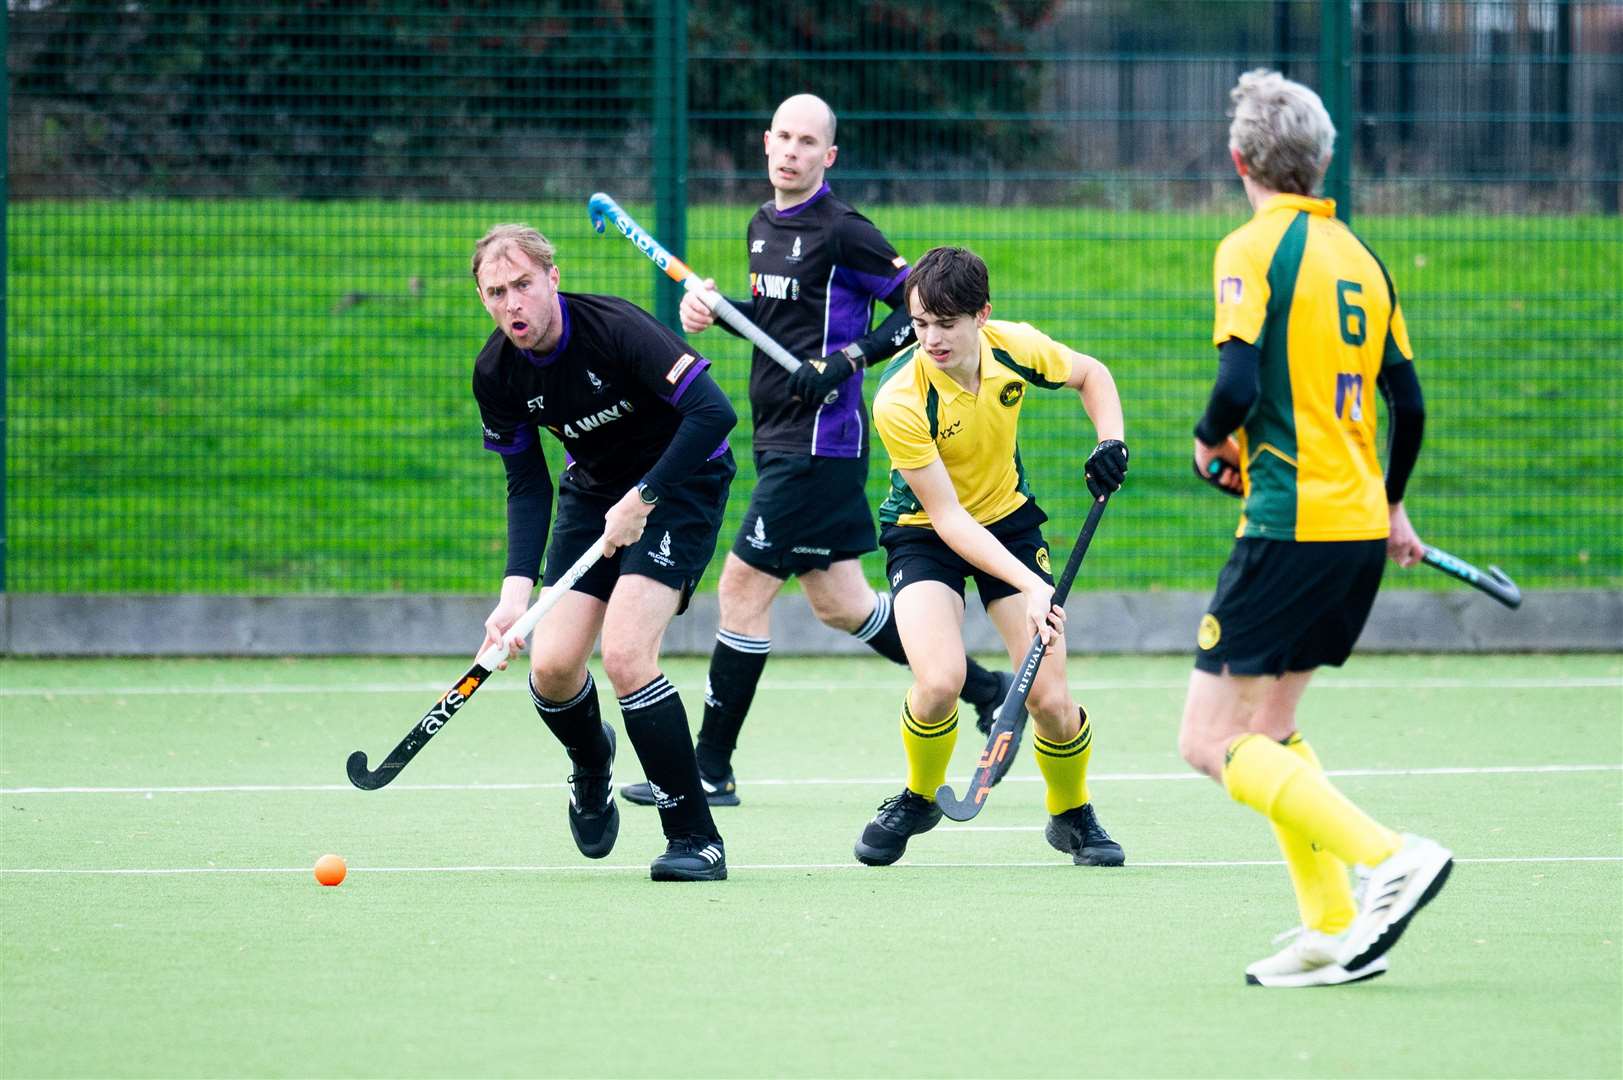 Pelicans in home action against Norwich City at Alive Lynnsport on Saturday. Pictures: Ian Burt